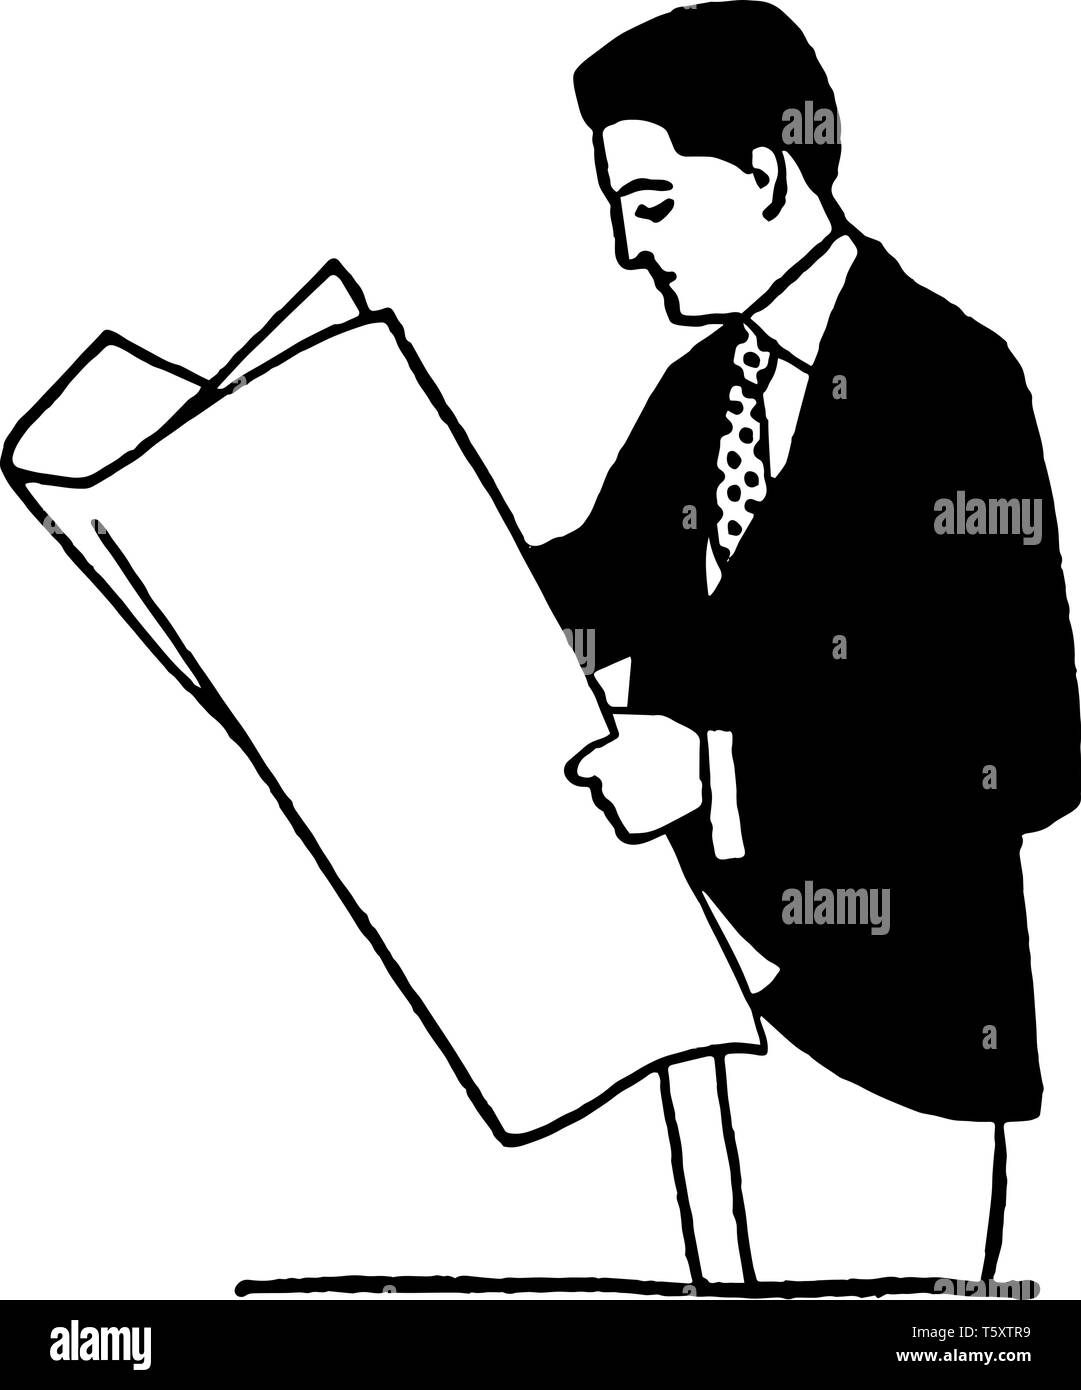 Man Reading Newspaper While Standing Adult Magazine News Periodical Press Reading Vintage Line Drawing Or Engraving Illustration Stock Vector Image Art Alamy